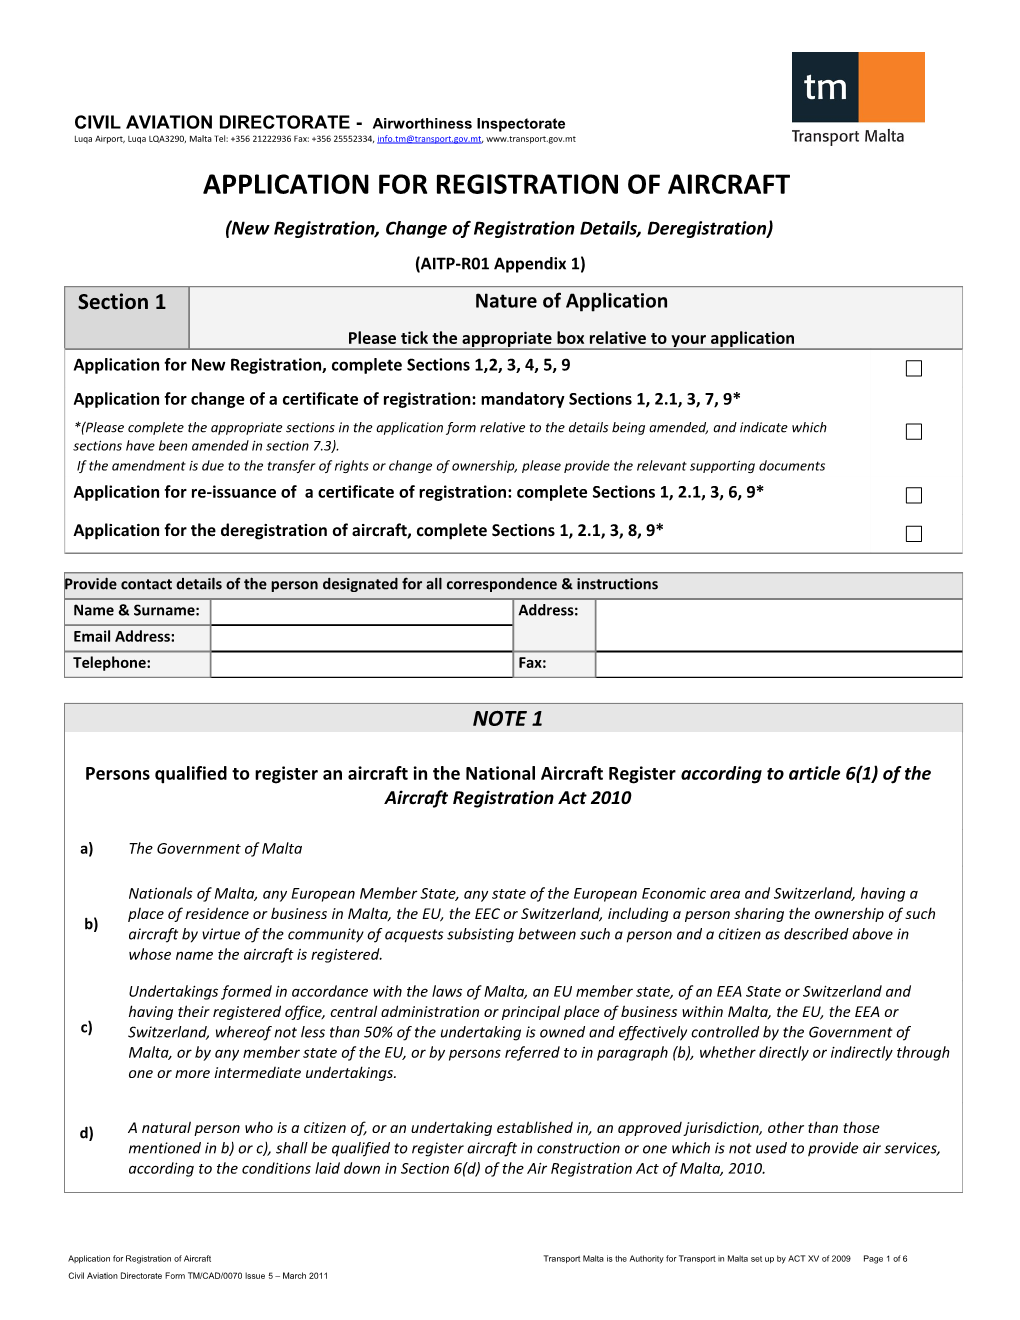 Application for Registration of an Aircraft 2010